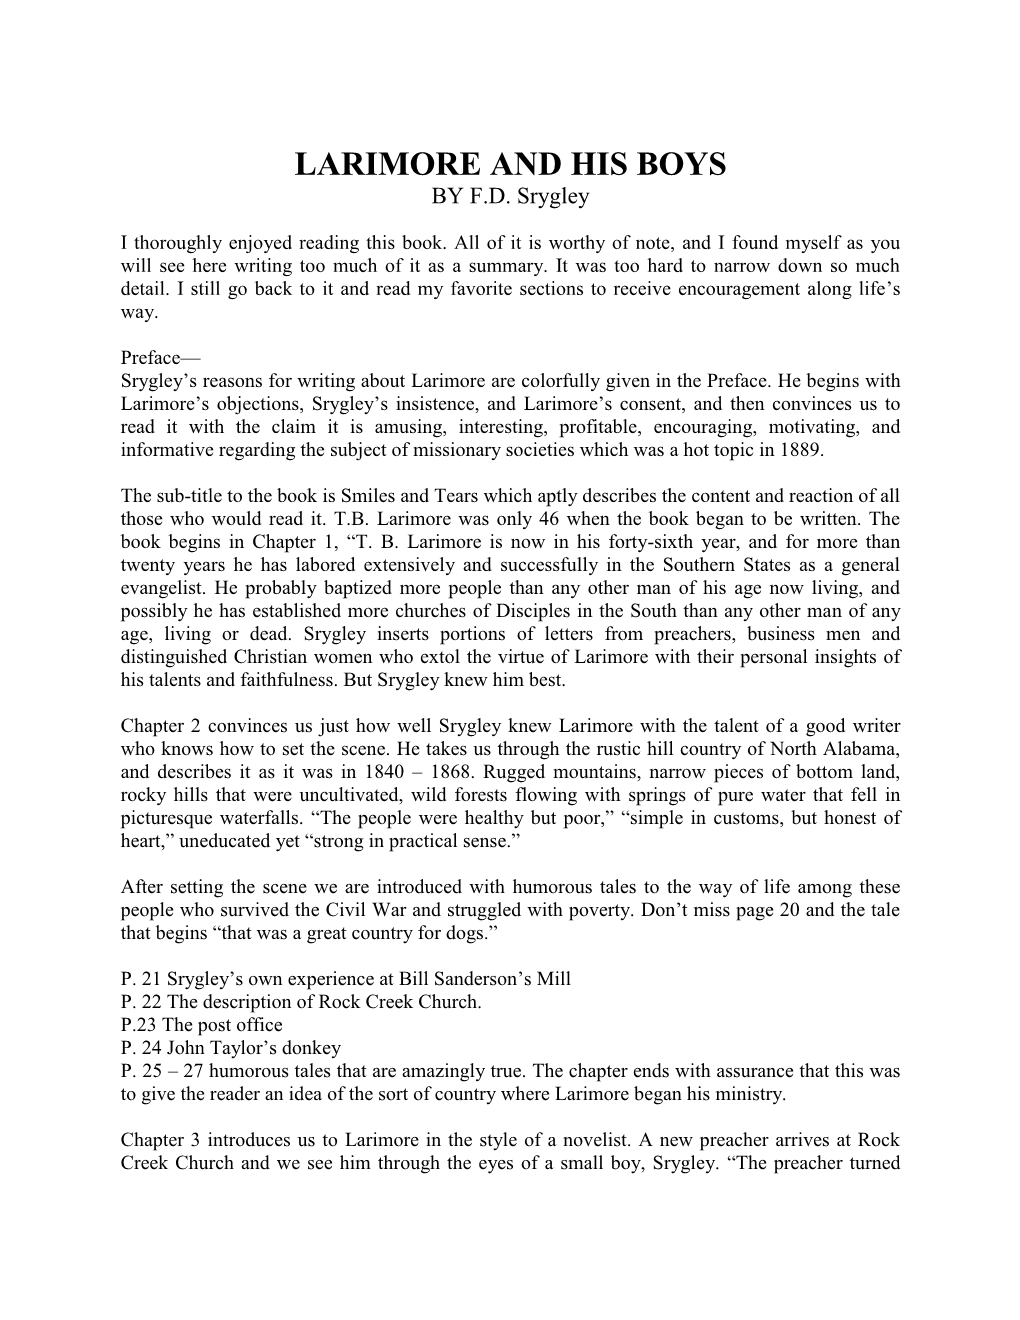 Larimore and His Boys by F.D